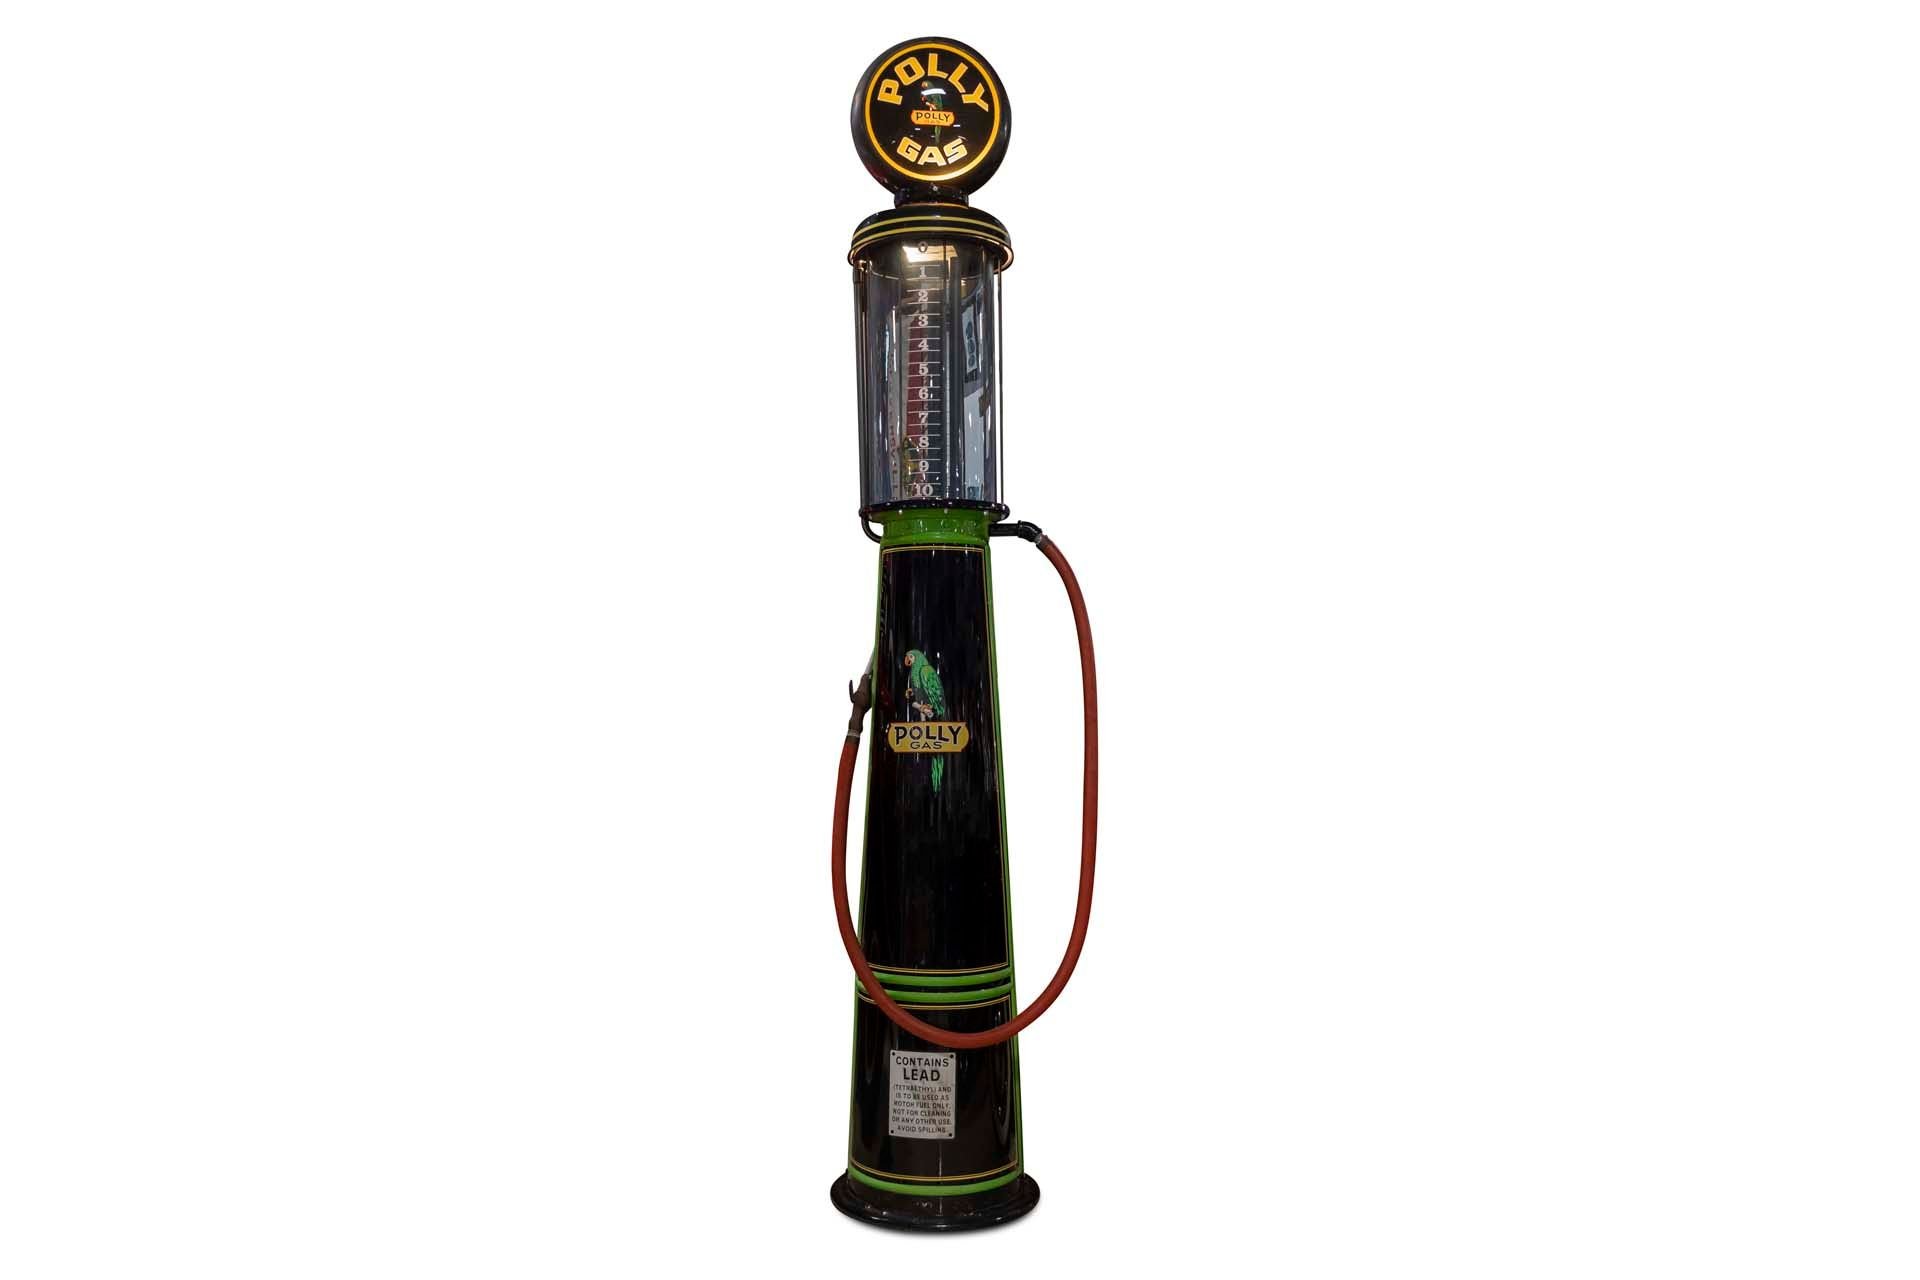 Broad Arrow Auctions | 'Polly Gas' Visible Gas Pump, Reproduction Glass Globe